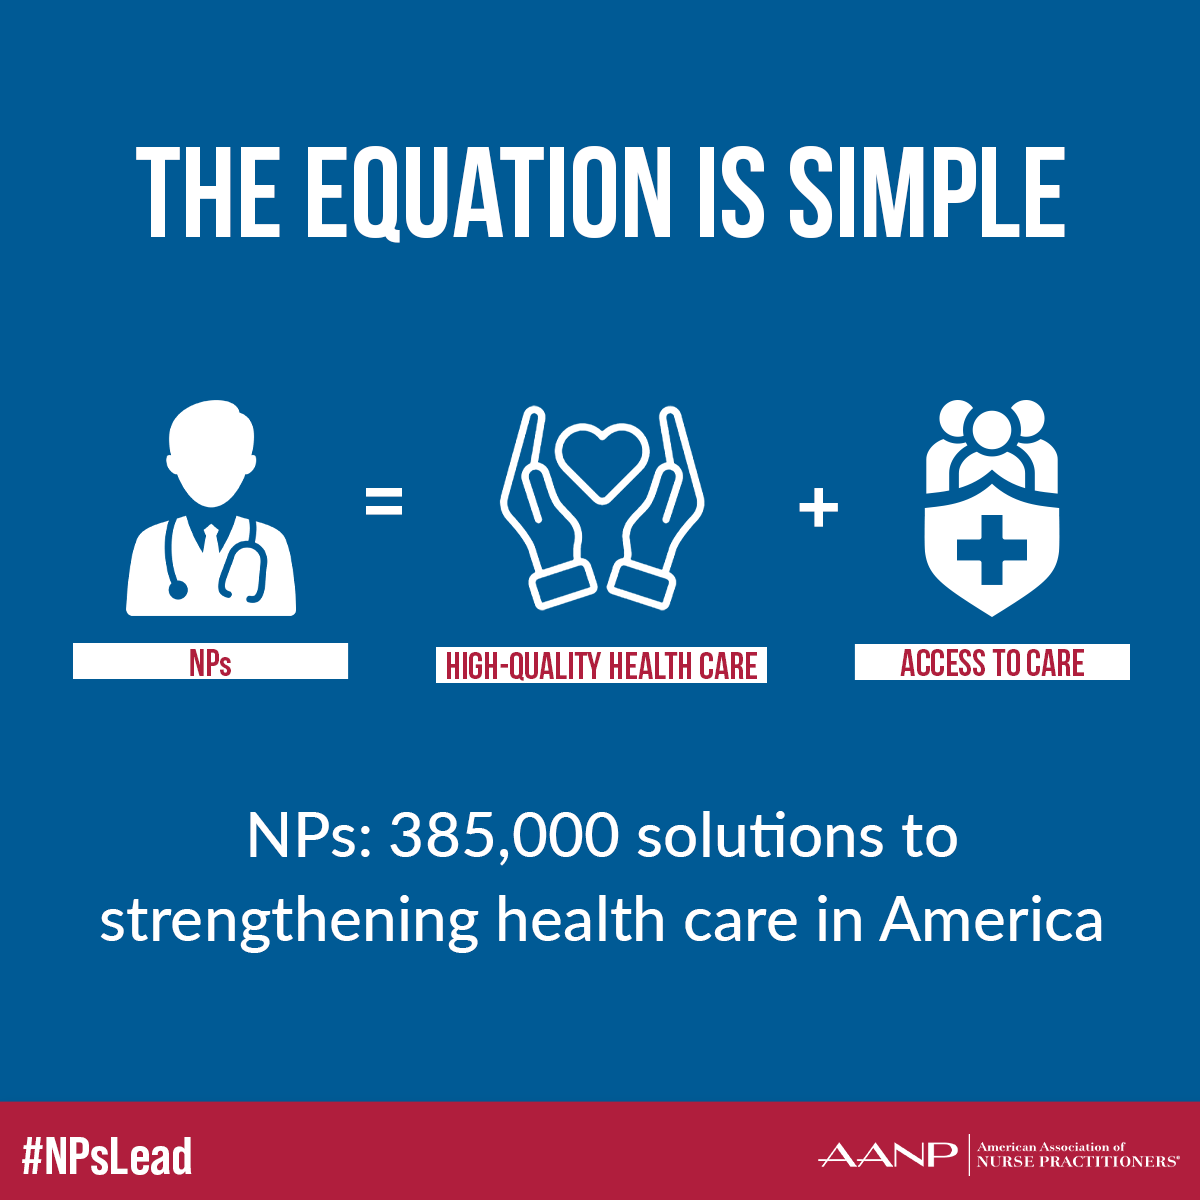 NPs offer 385,000 solutions for strengthening health care in the U.S. Read on to learn more about the important work done by these incredible health care providers: bit.ly/nps-lead. #NPsLead